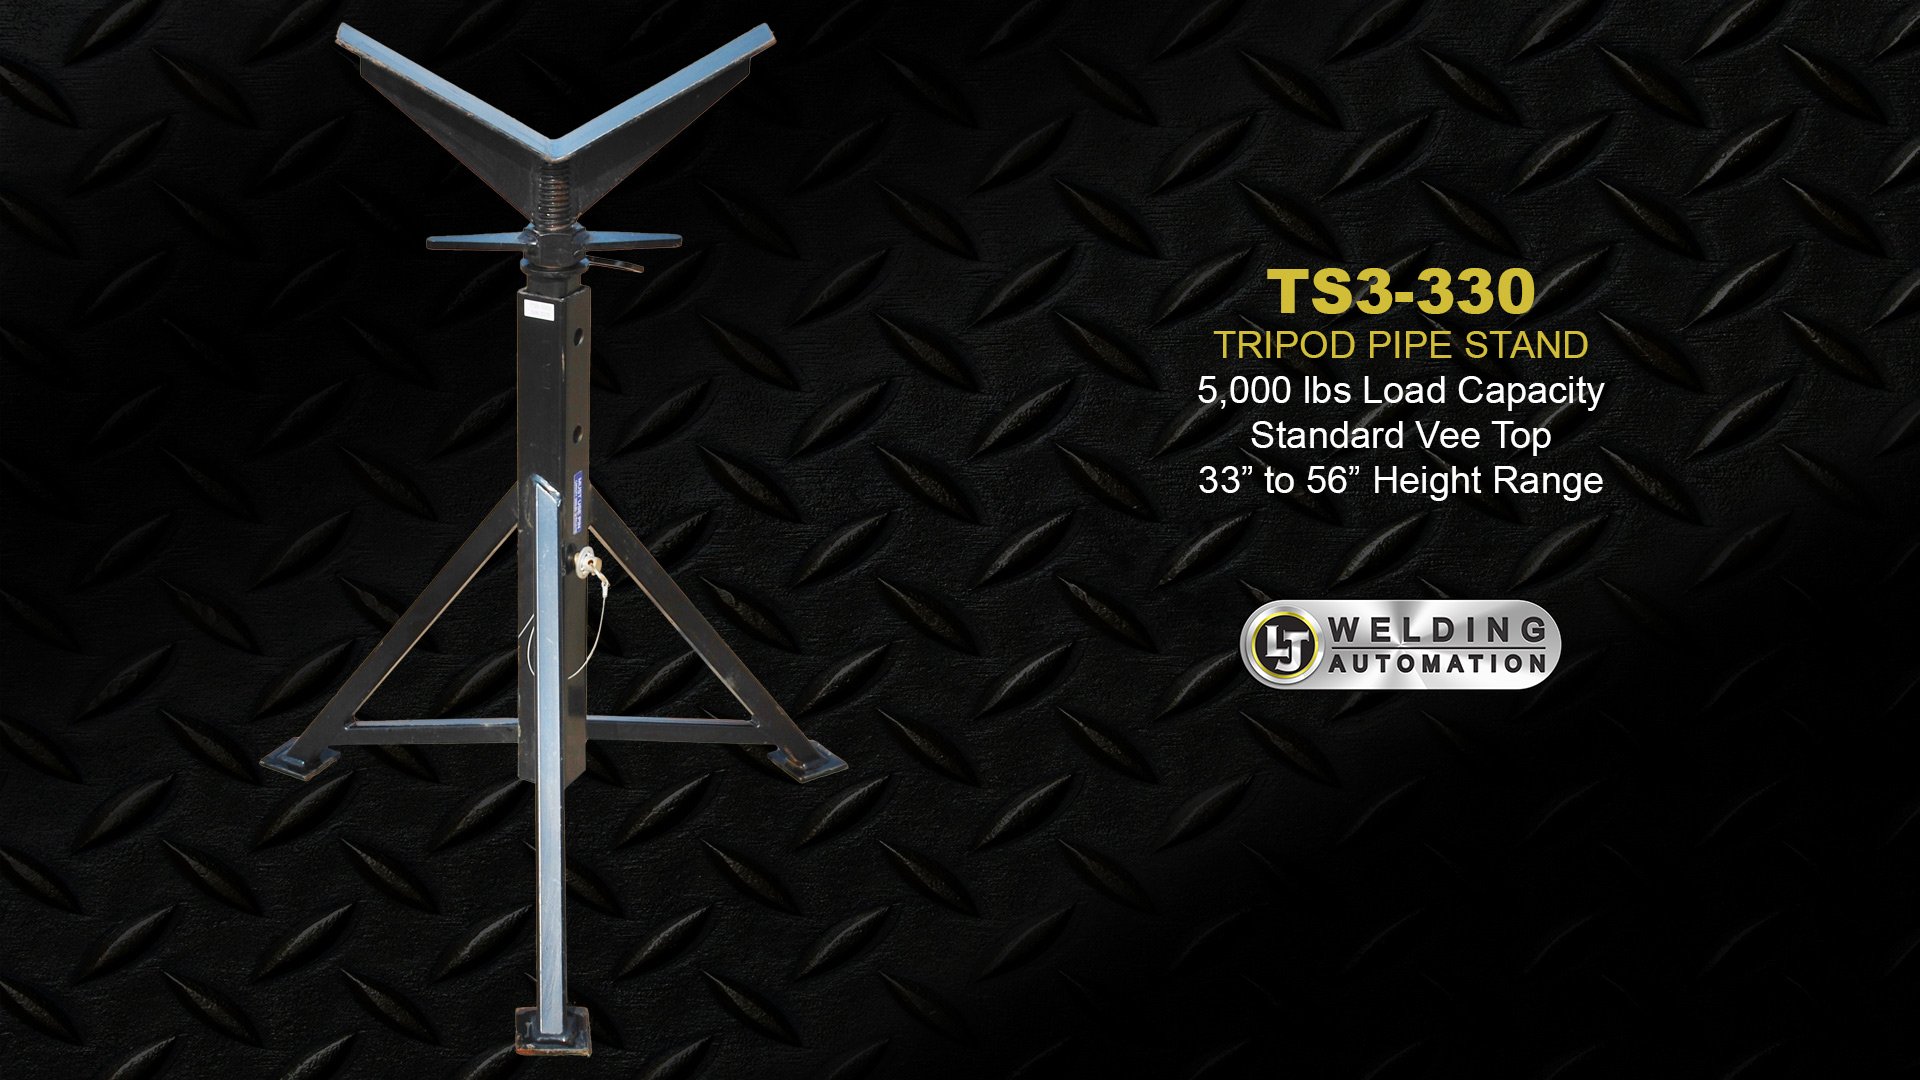 5,000 lb Tripod Pipe Stands For Rent or Sale - TS3-330V